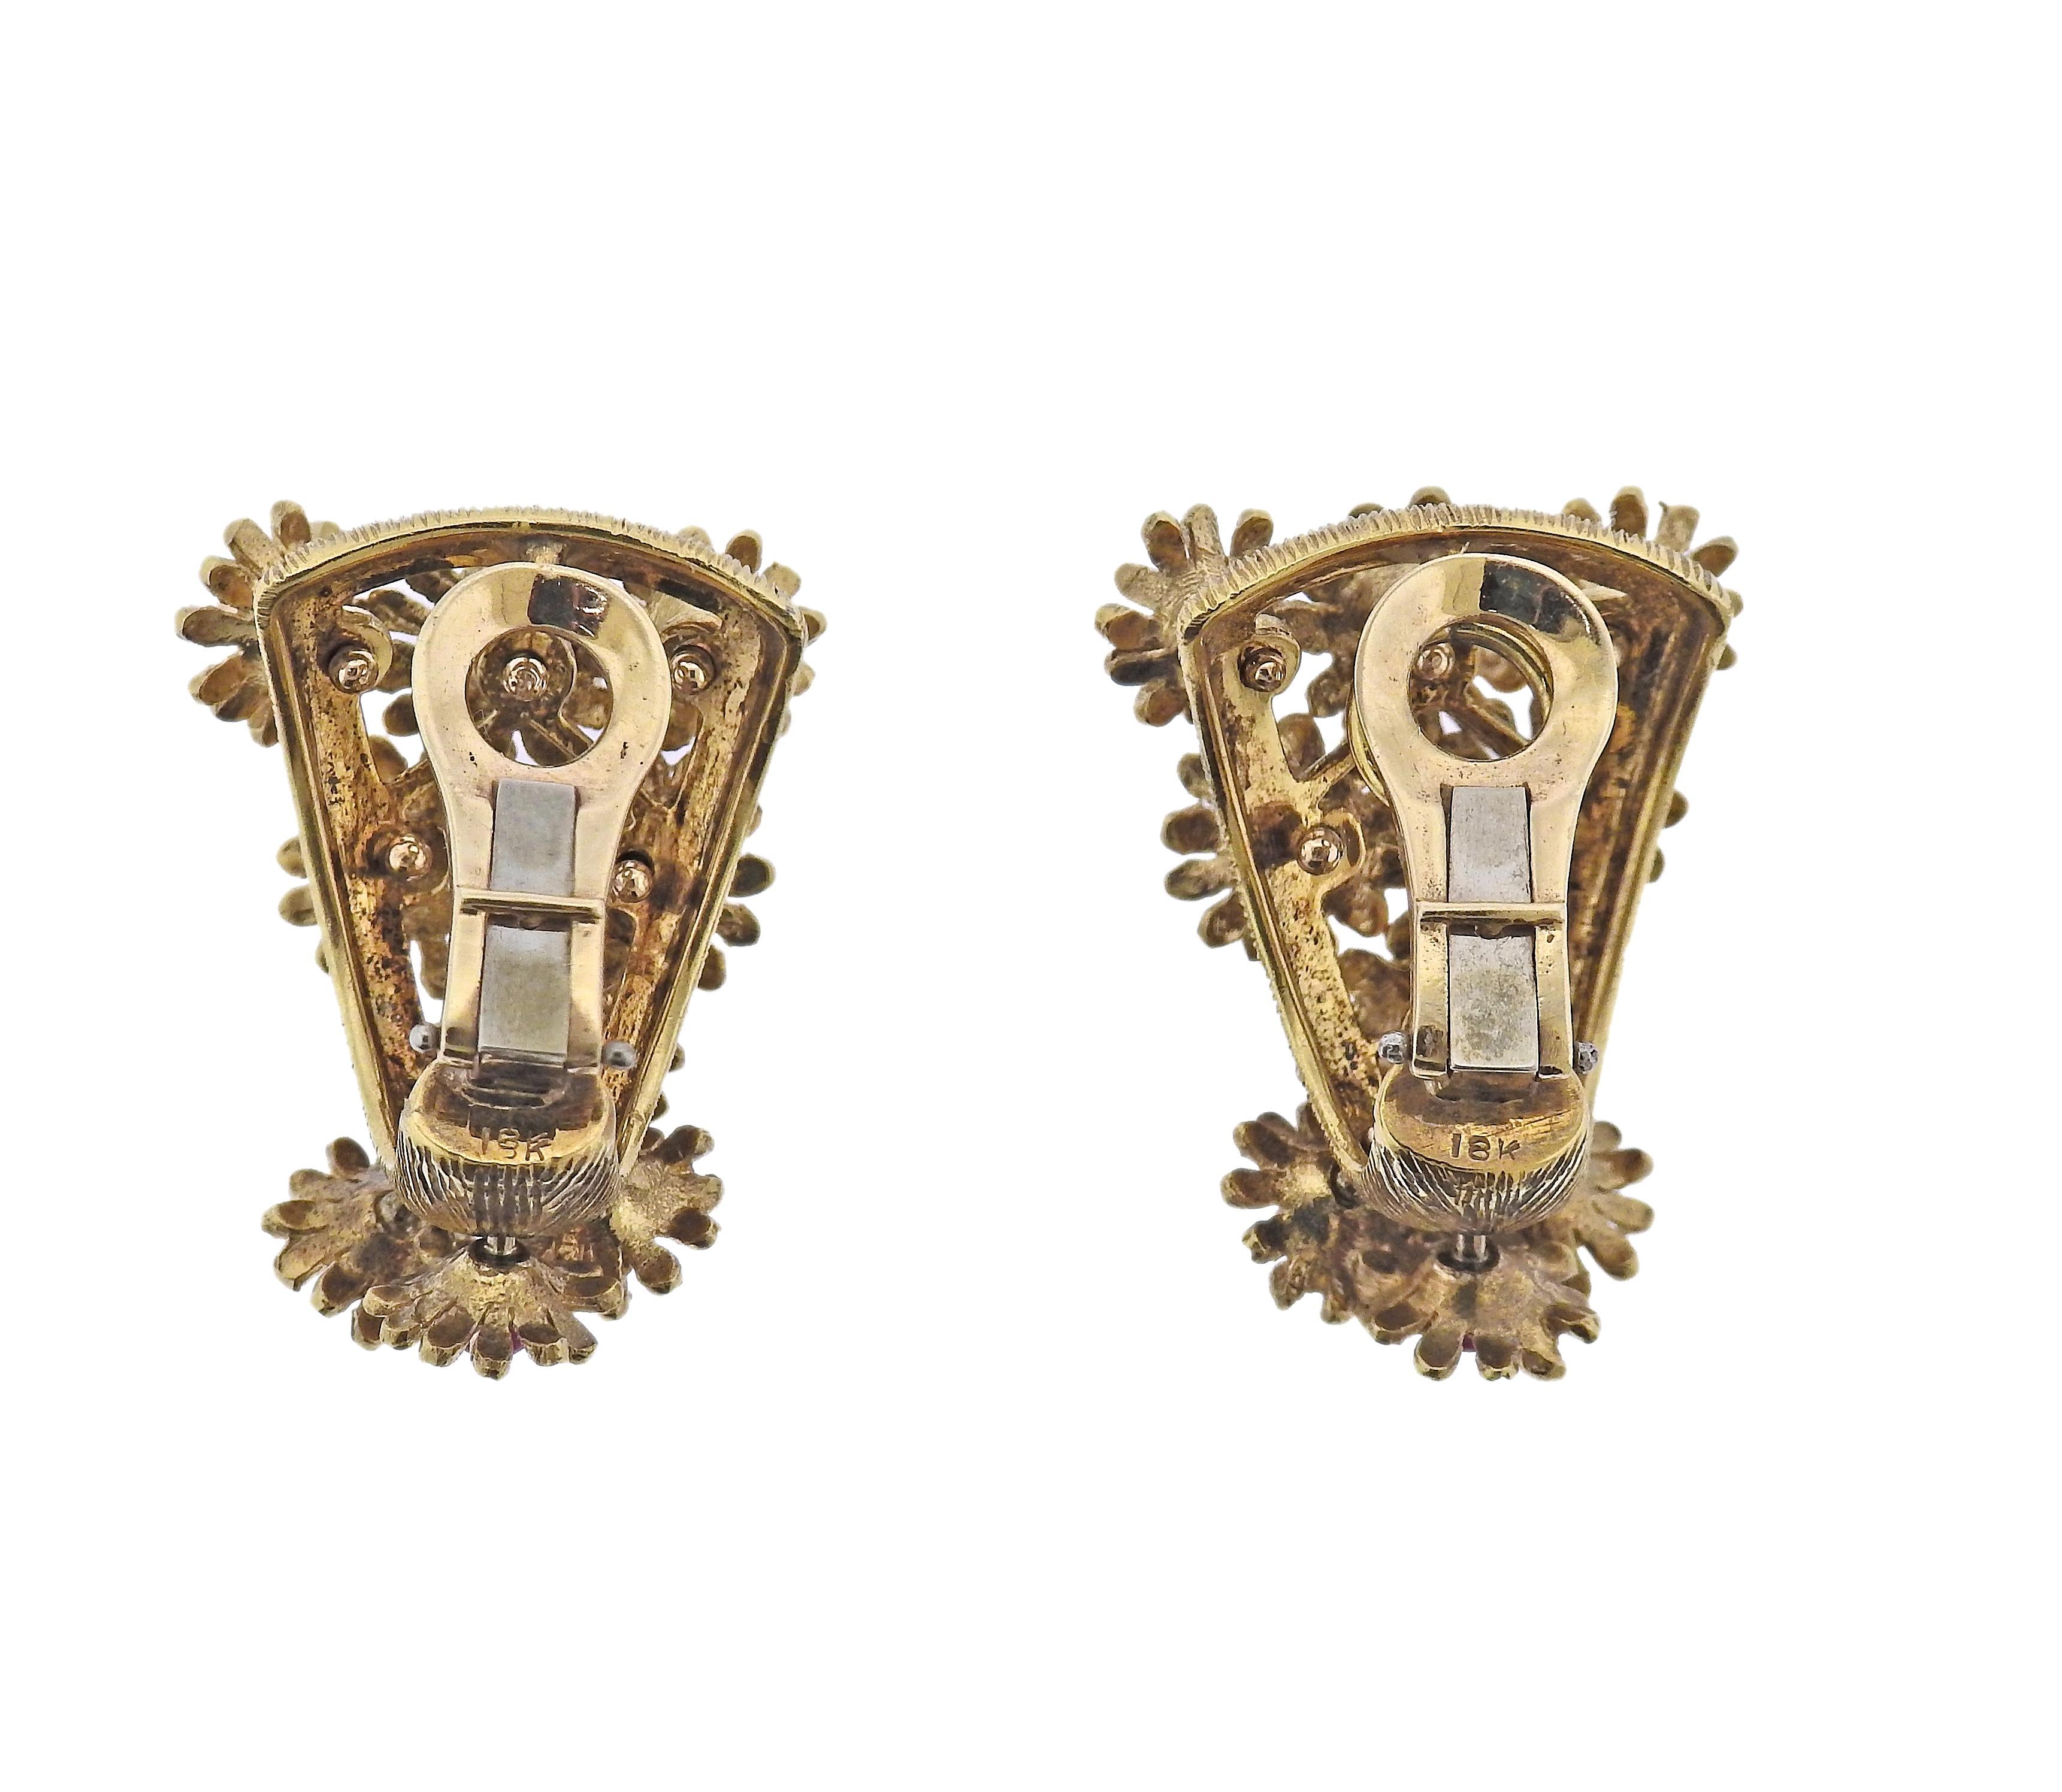 Pair of 1960s 18k gold earrings with movable flowers, set with rubies and approx. 0.20ctw in diamonds. Earrings are 32mm x 22mm. Marked 18k. Weight - 25.5 grams.